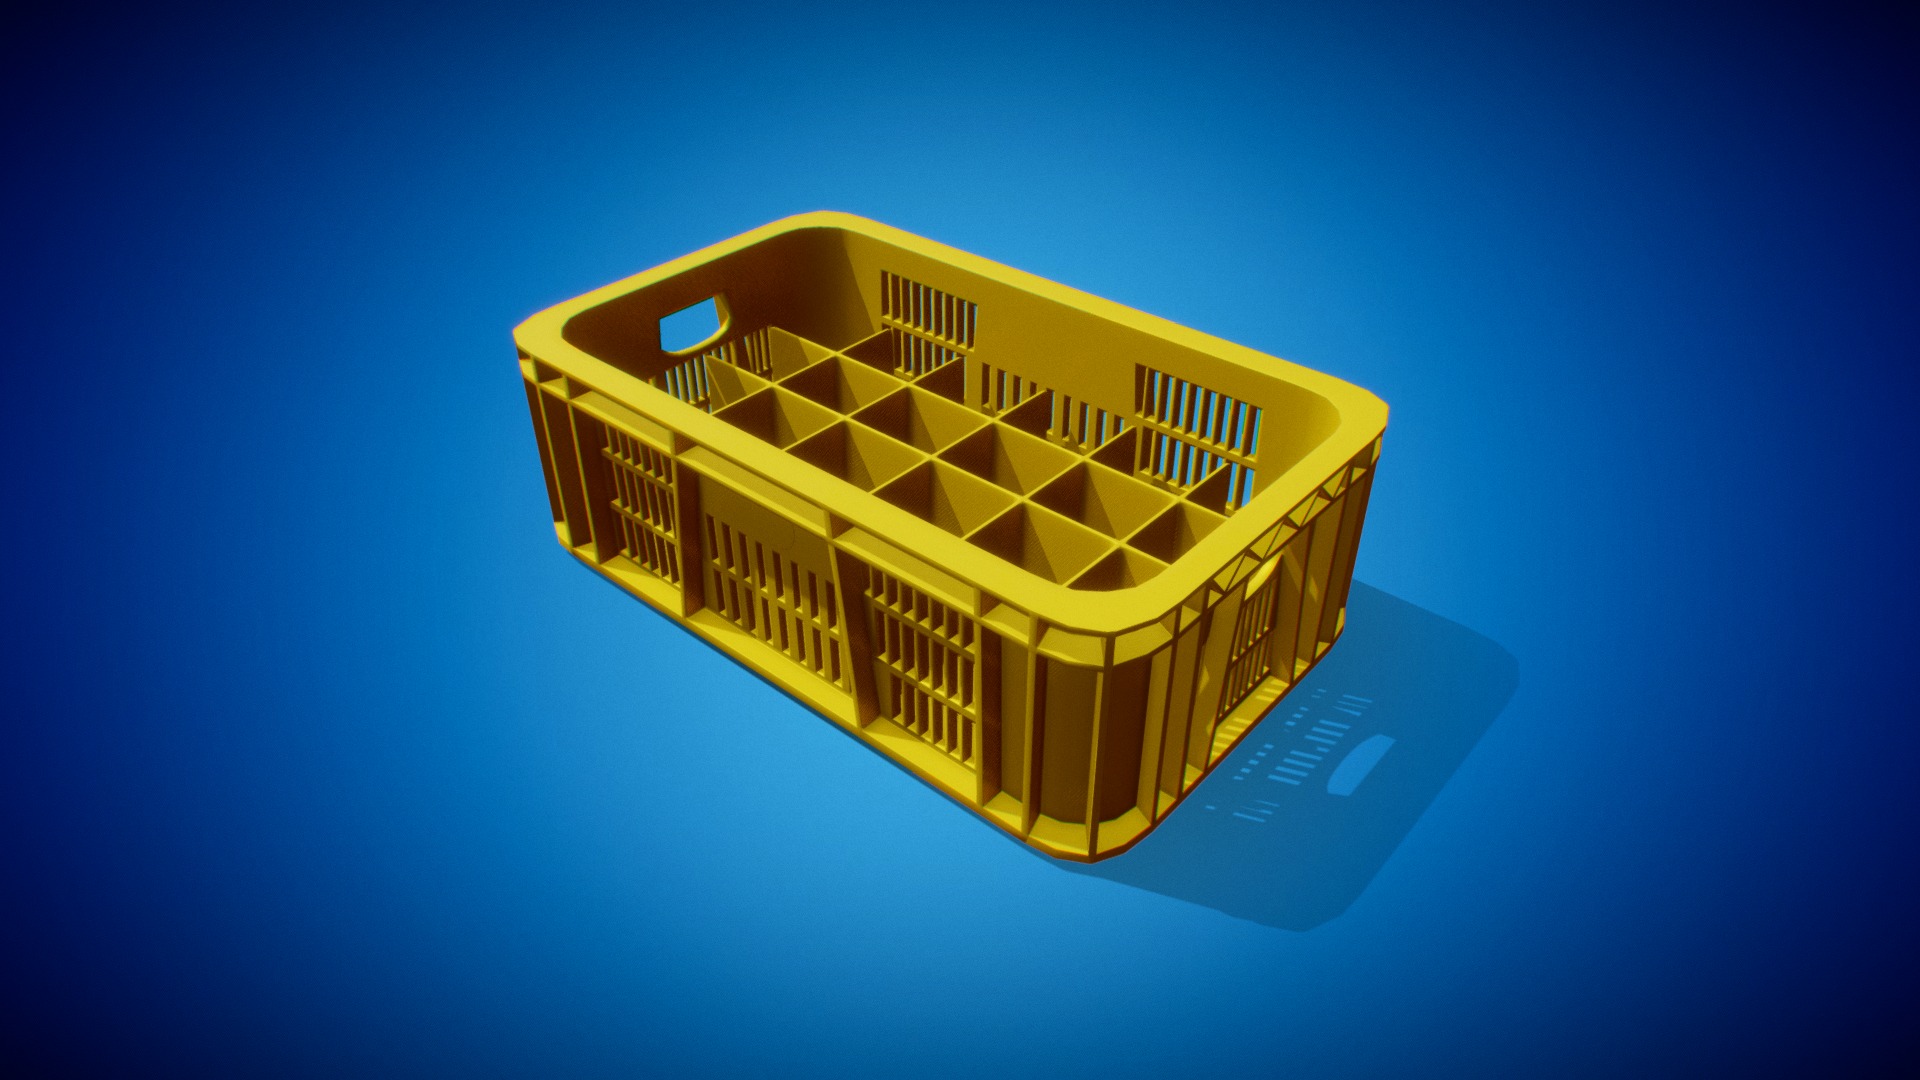 3D model Soda crate low poly - This is a 3D model of the Soda crate low poly. The 3D model is about a yellow and black logo.